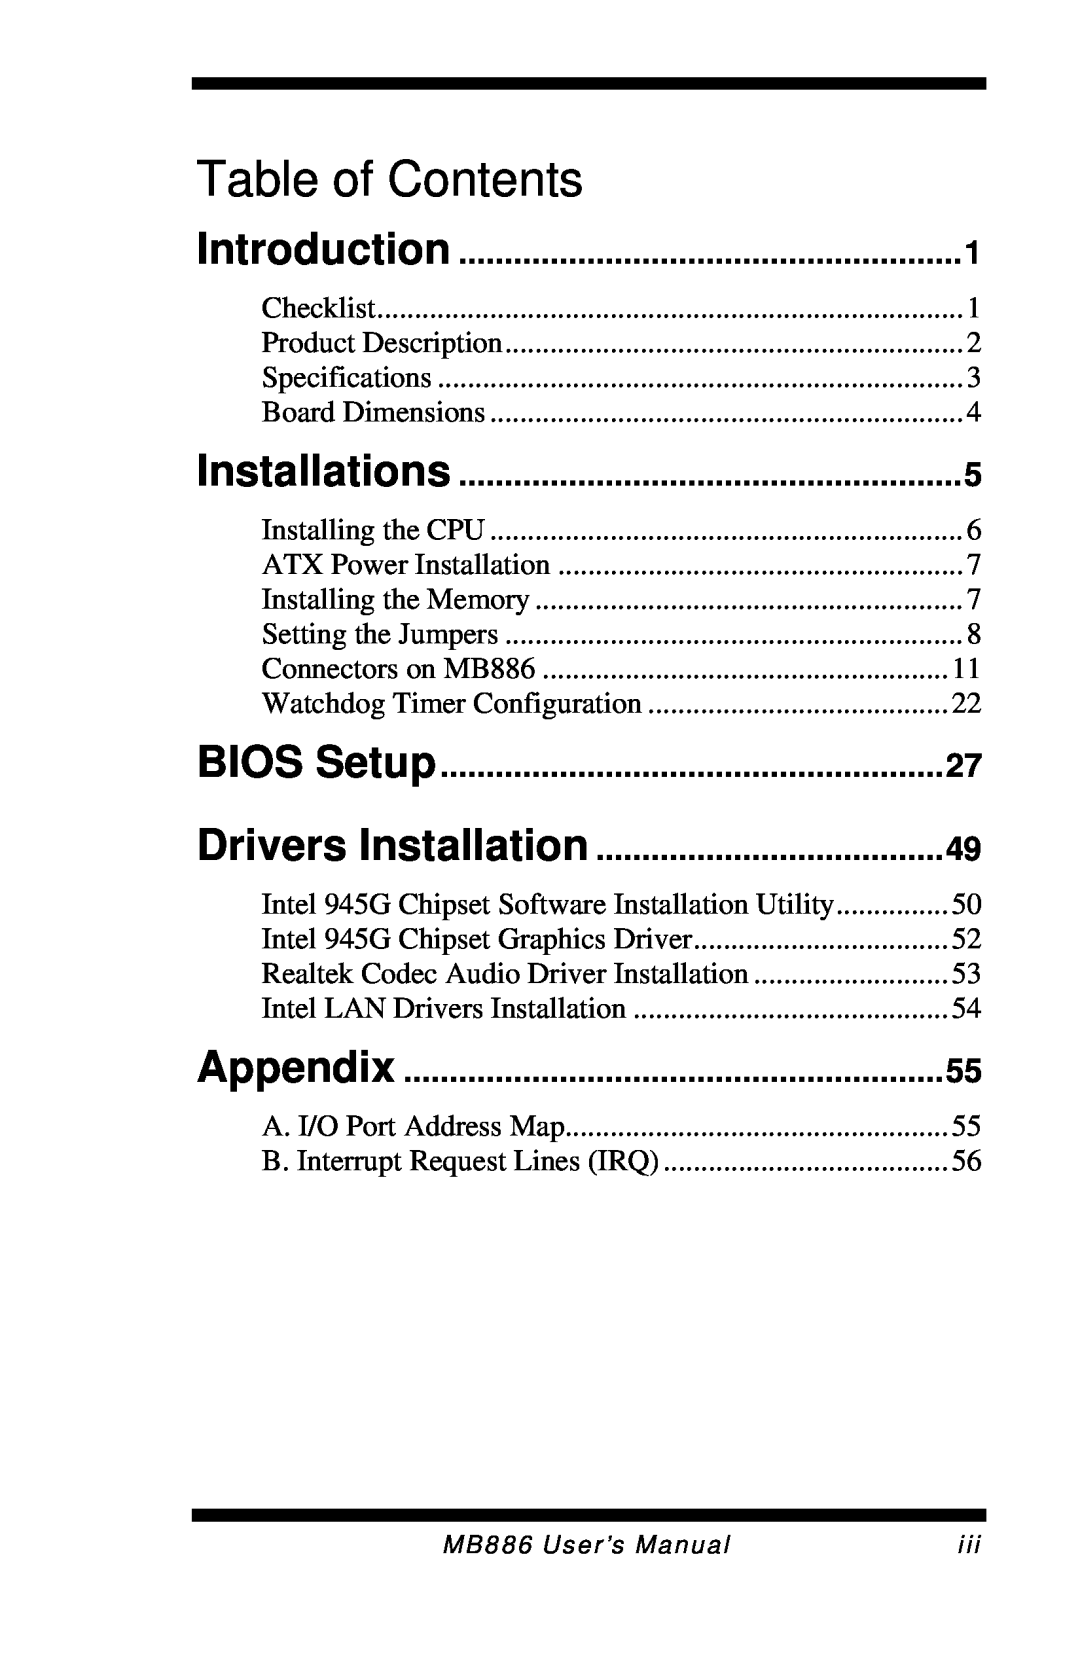 Intel MB886 user manual Introduction, Installations, BIOS Setup, Drivers Installation, Appendix, Table of Contents 